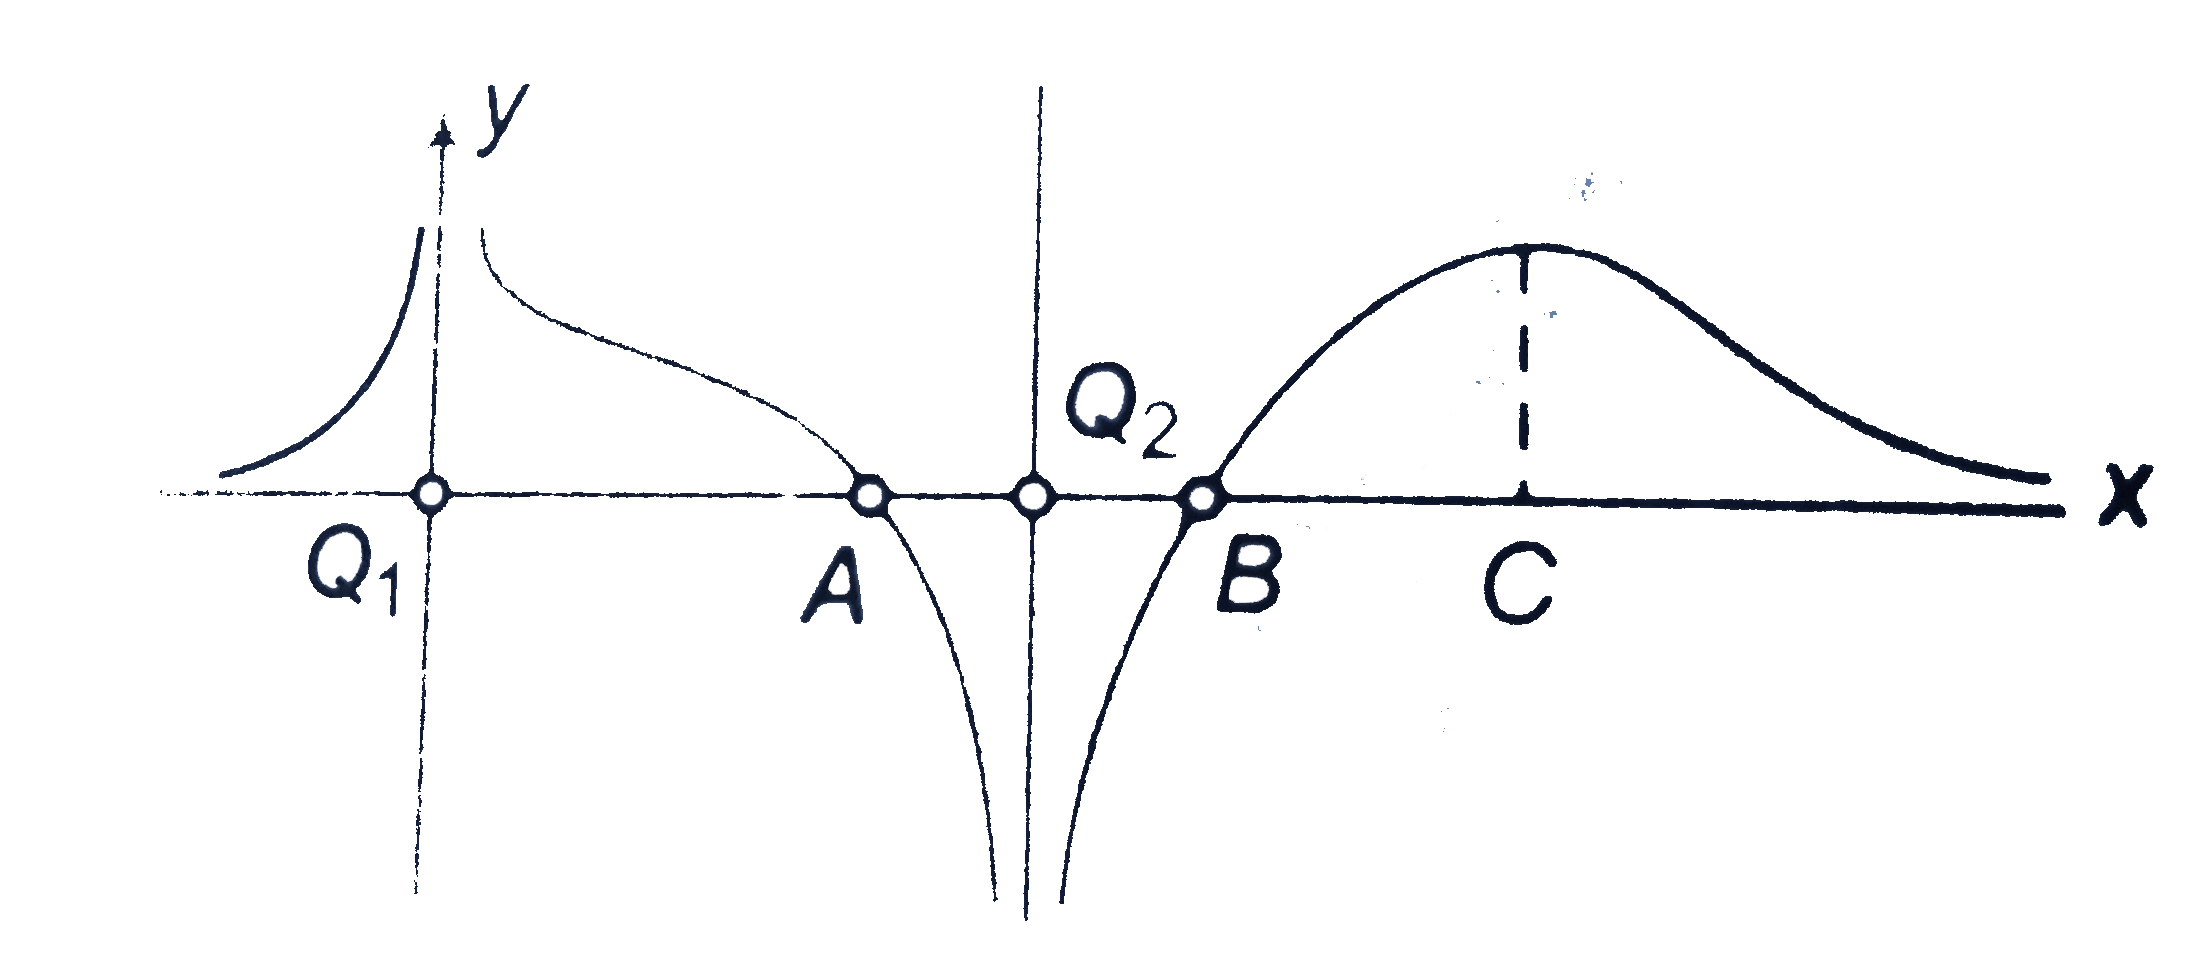 The curve represents the distribution of potential along the staight line joining the two charges Q1 and Q2 (separated by a distance r) then which of the following statements are correct?      1. |Q1|gt|Q2|   2. Q1 is positive in nature   3. A and B are equilibrium points   4. C is a point of unstable equilibrium